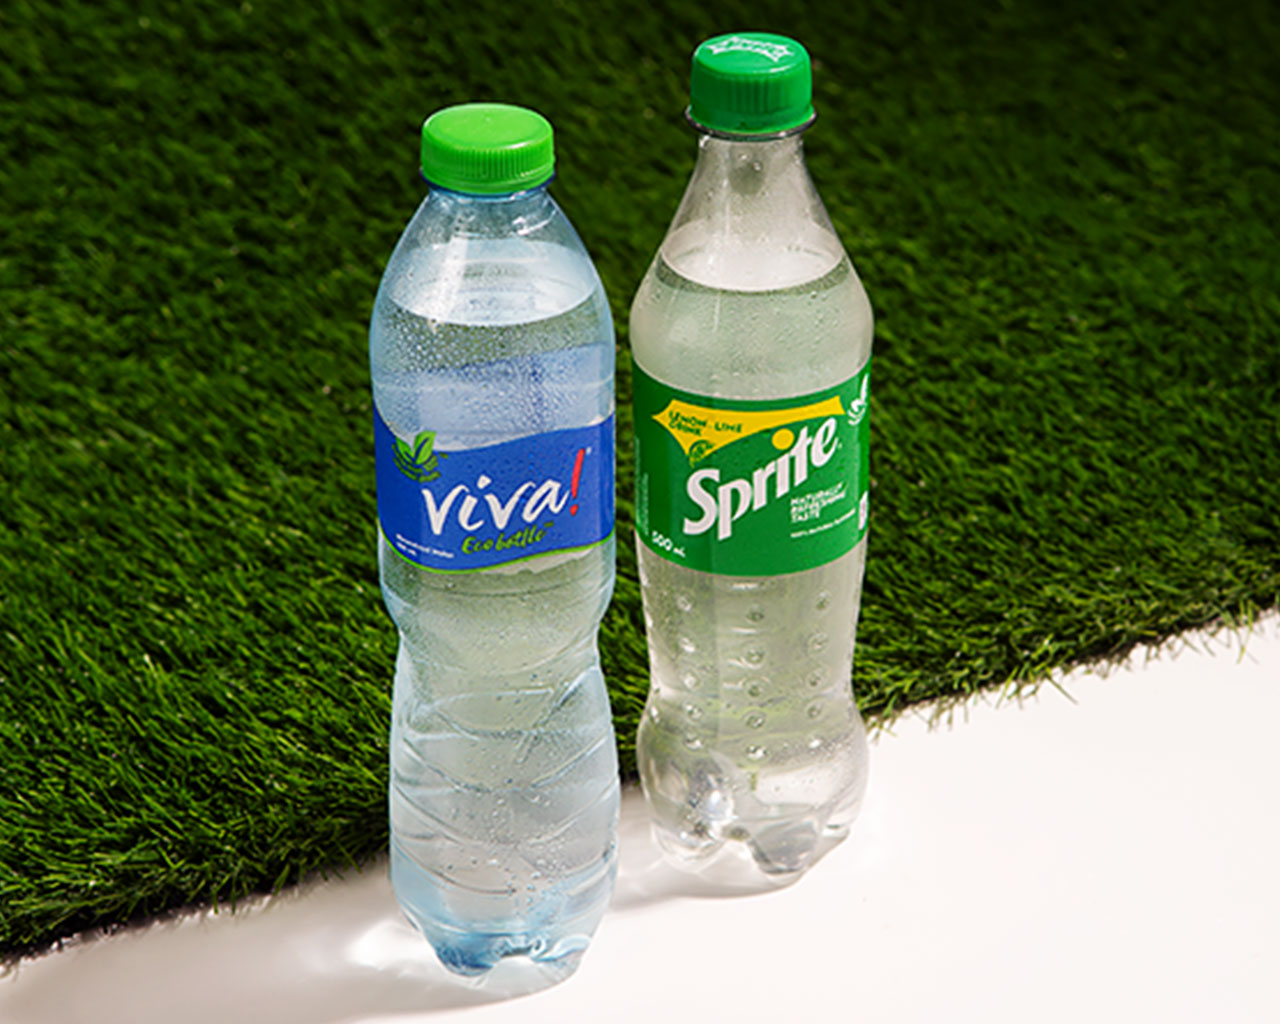 A Viva! and a Sprite bottle side by side